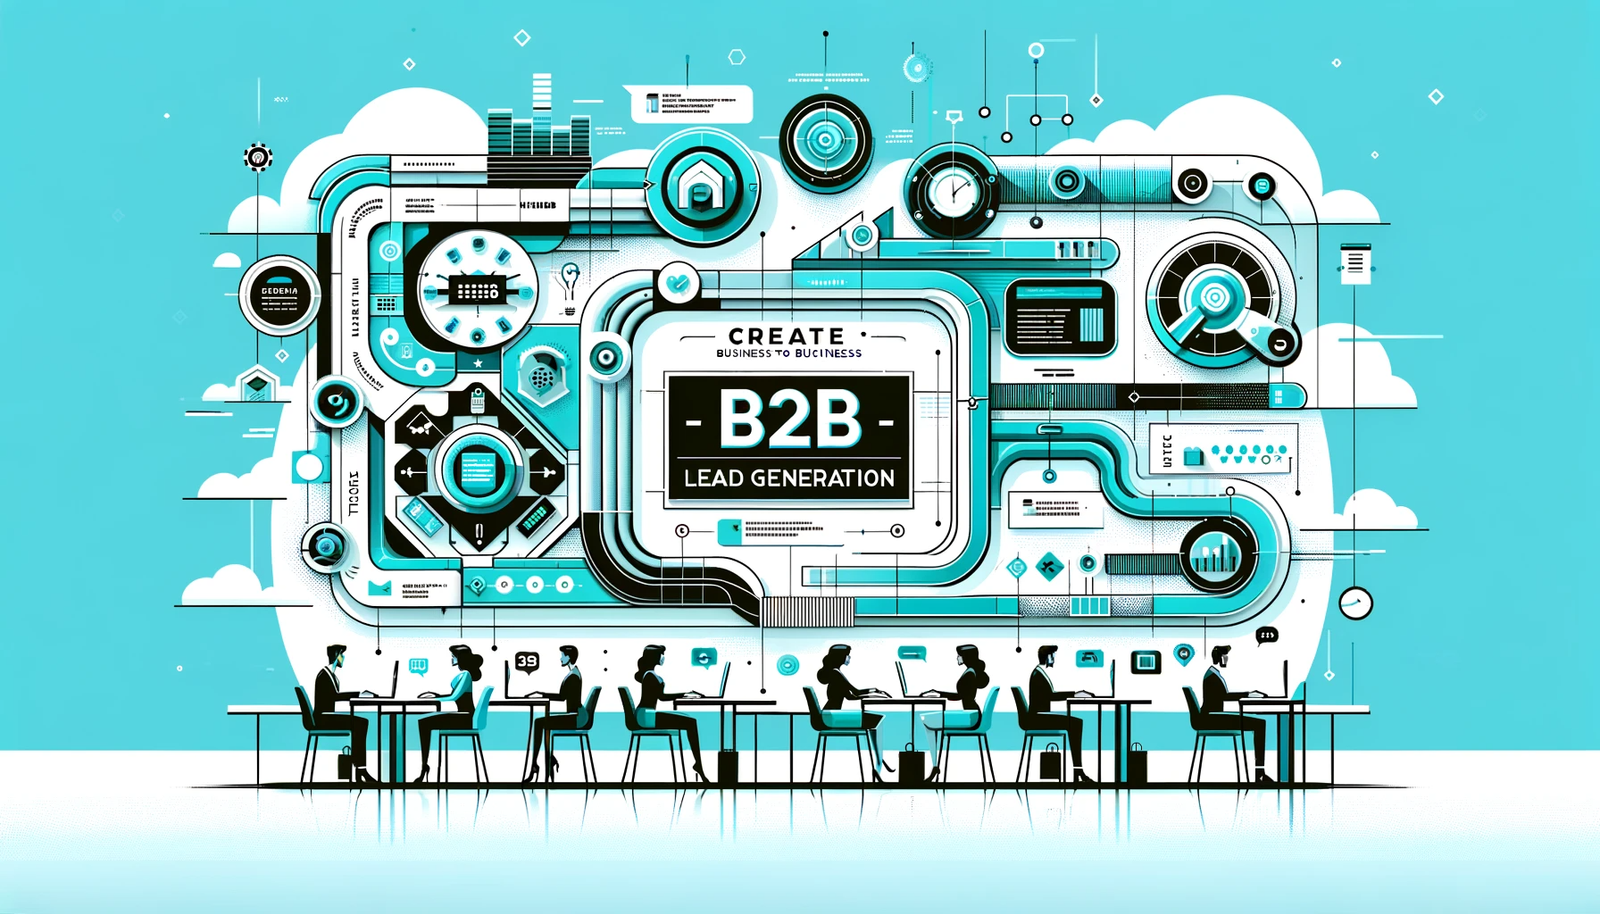 DALL·E 2023 11 05 15.16.05 Create a modern horizontal infographic for a digital environment showcasing B2B Lead Generation. Use minimal text and incorporate a vibrant turquoi